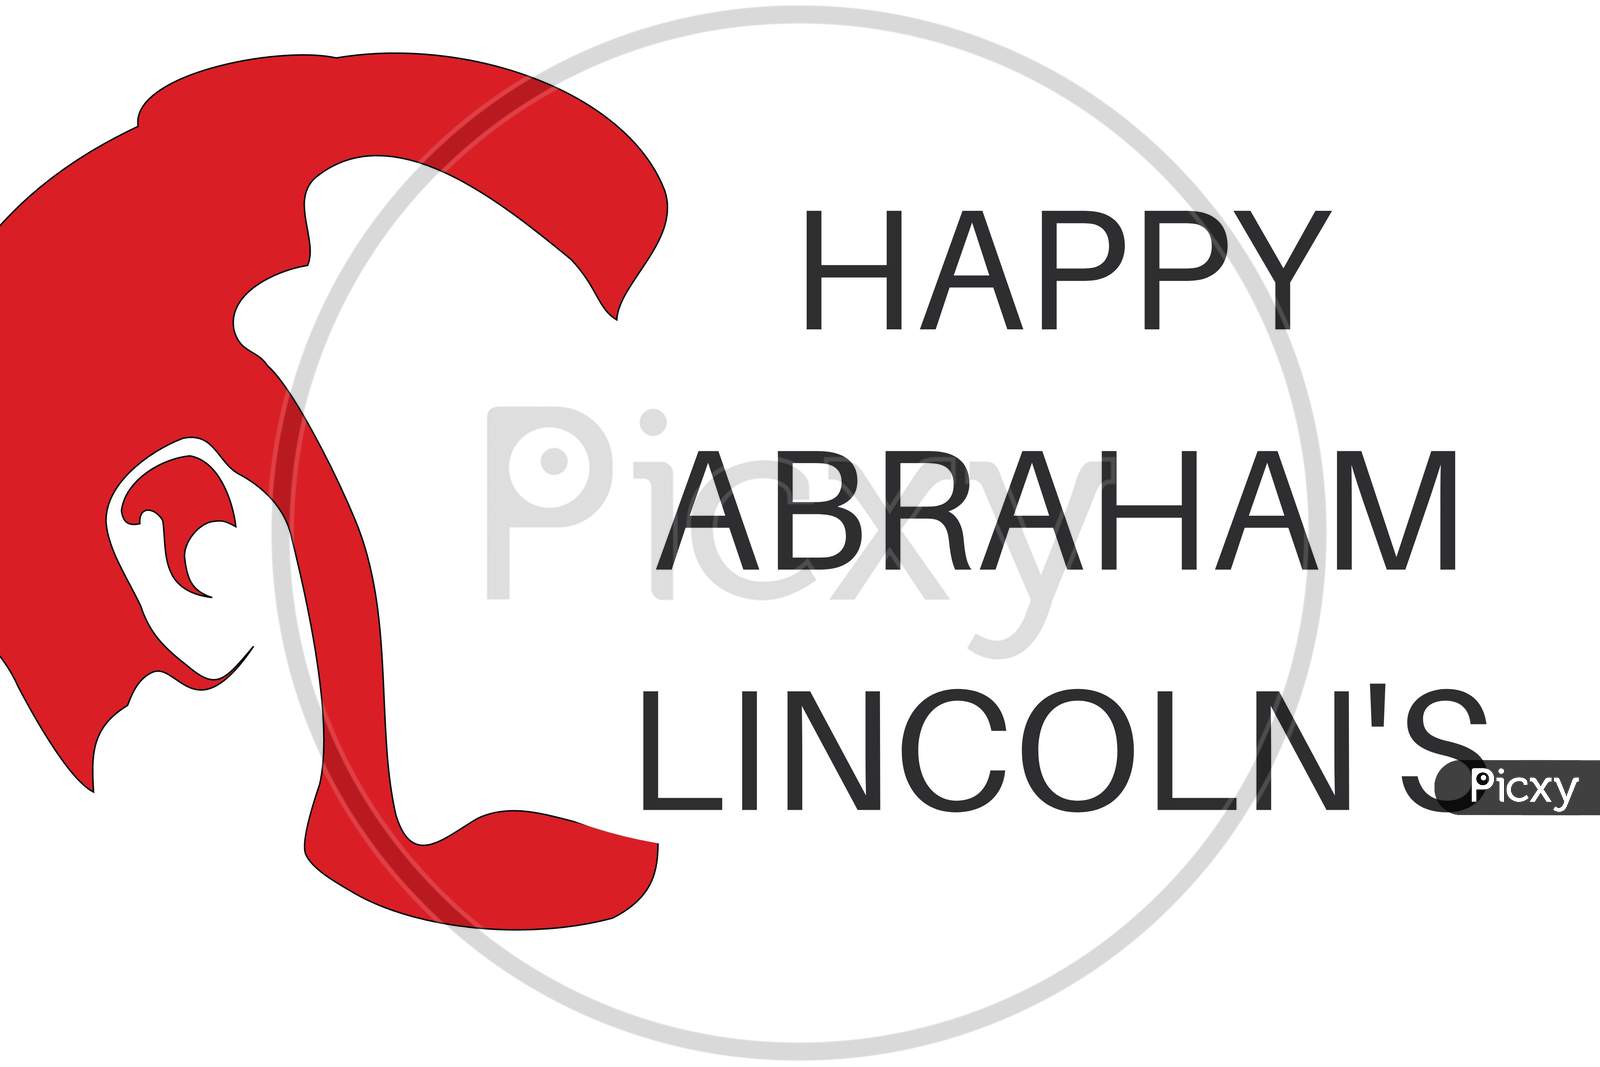 Abraham Lincoln’S Birthday Text With Graphics . National Holiday In The United States. Poster, Banner And Background . Birthday Of One Of The Most Popular Presidents Of America.